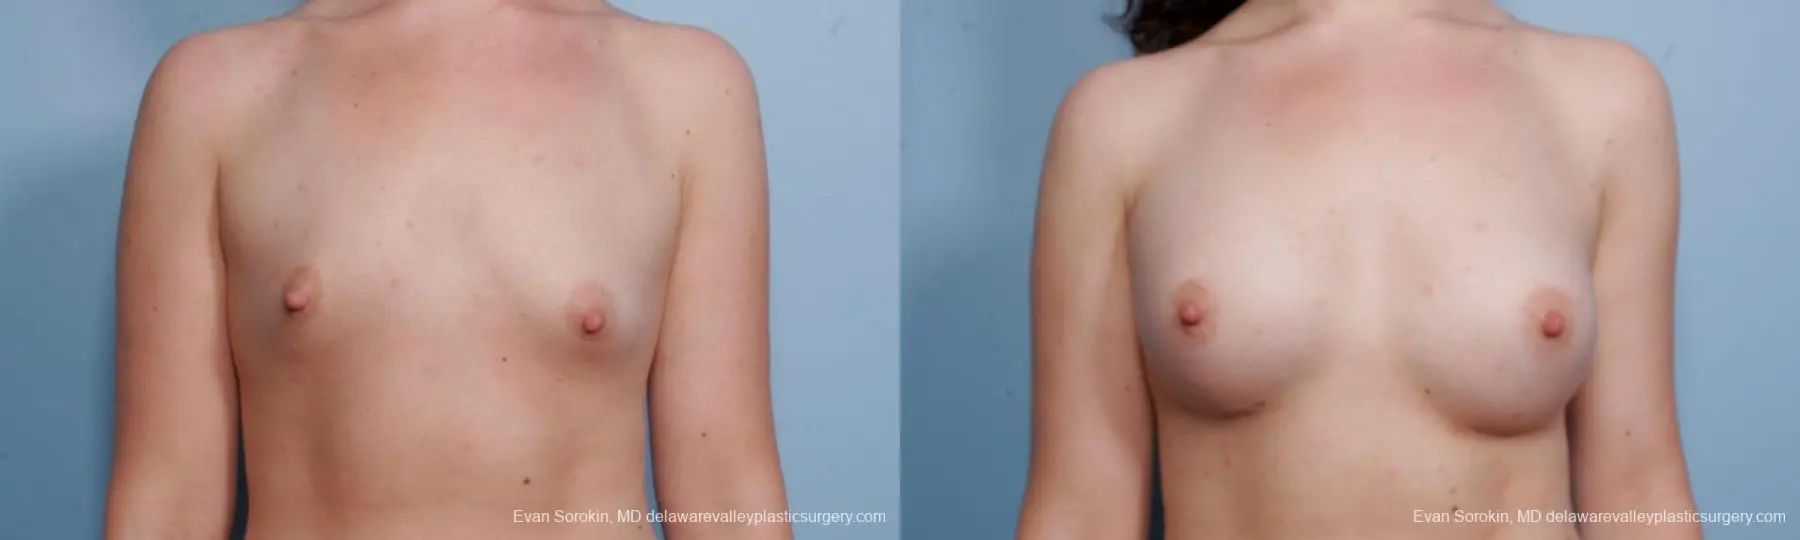 Philadelphia Breast Augmentation 9176 - Before and After 1